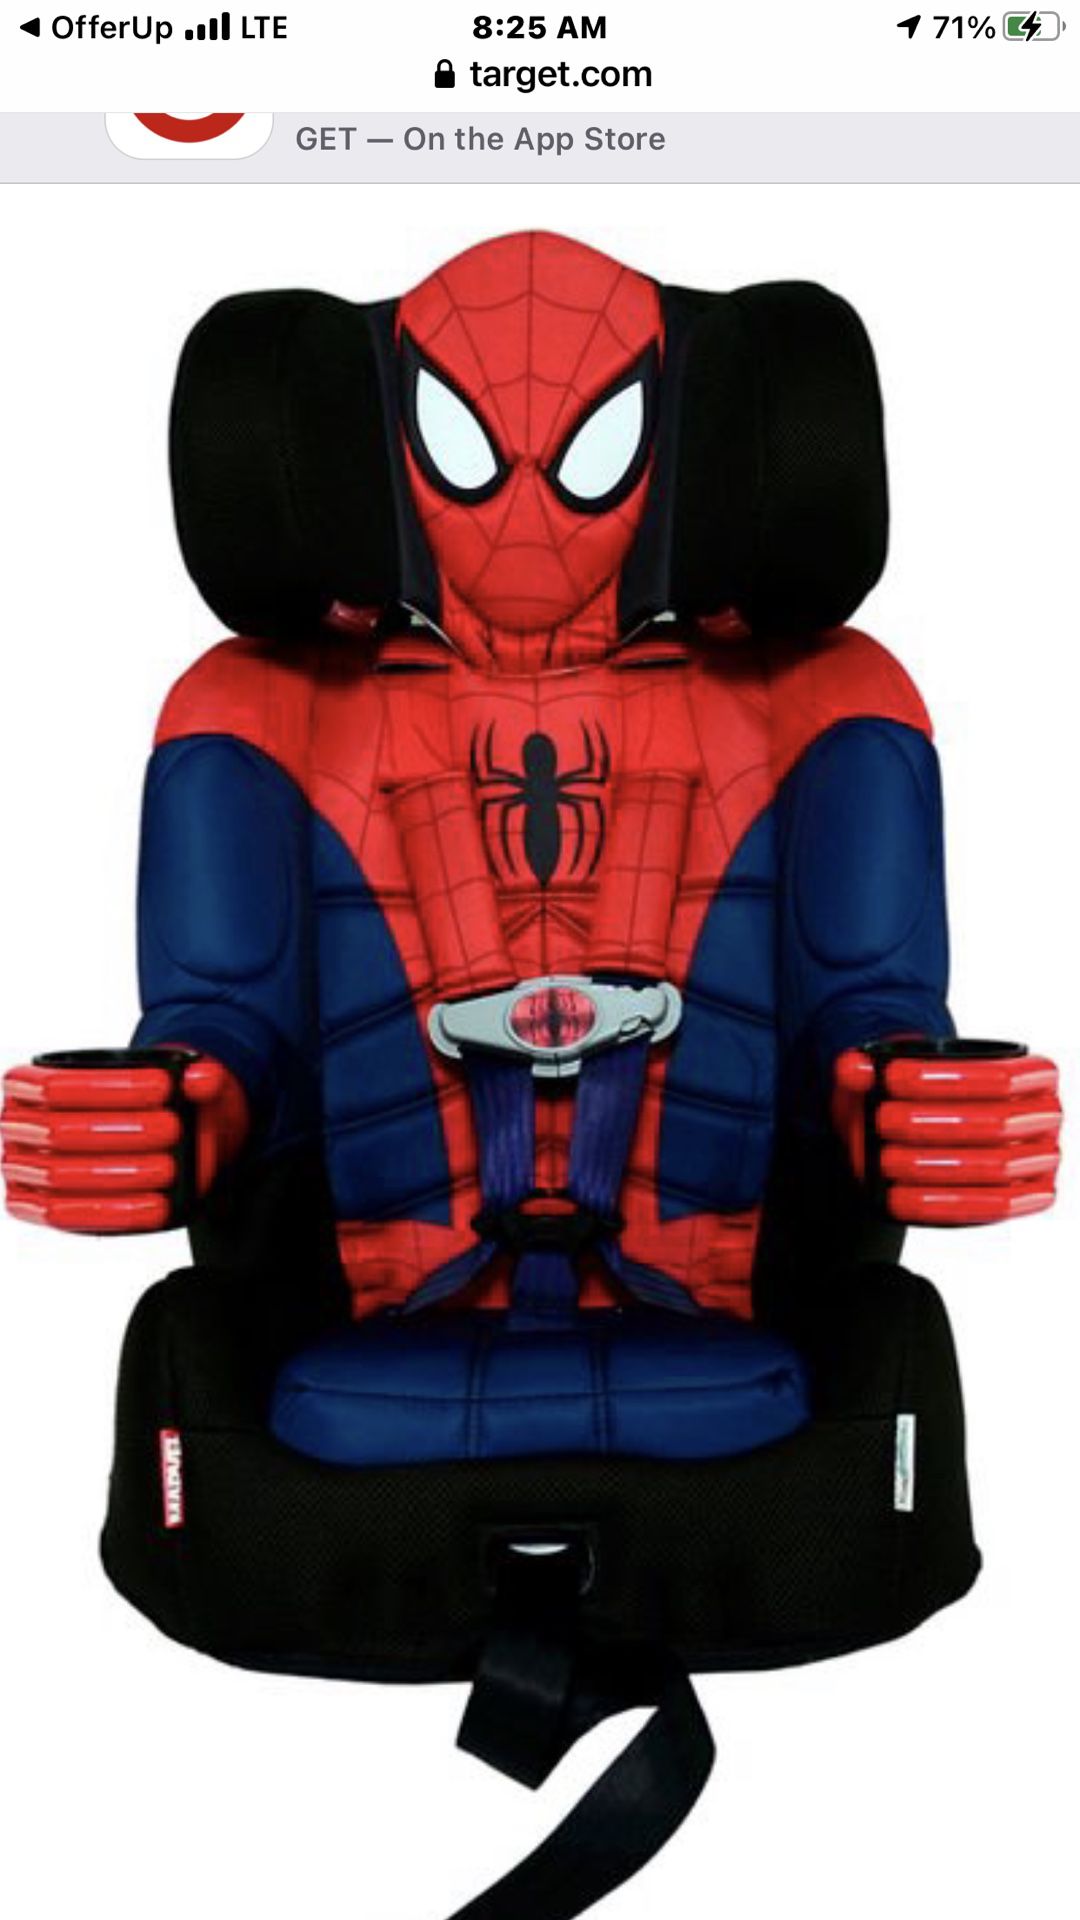 Kids'Embrace Marvel Ultimate Spider-Man Combination Harness Booster Car Seat